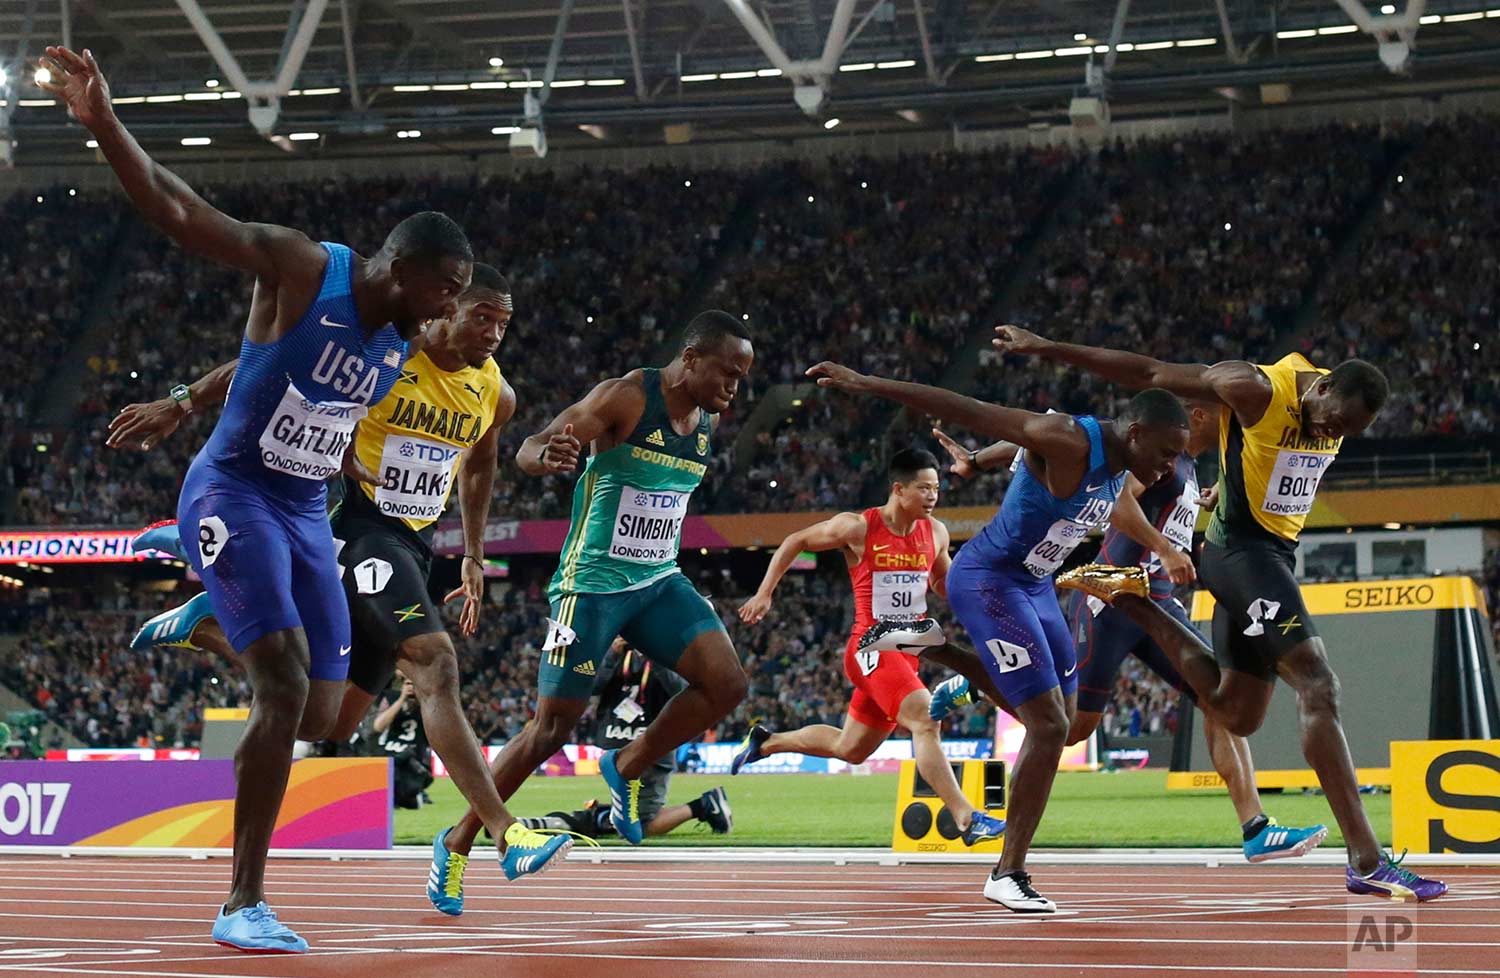  In this Saturday, Aug. 5, 2017 photo, United States' Justin Gatlin, left, crosses the line to win gold ahead of silver medal winner United States' Christian Coleman, second right, and bronze medal winner Jamaica's Usain Bolt, right, in the men's 100